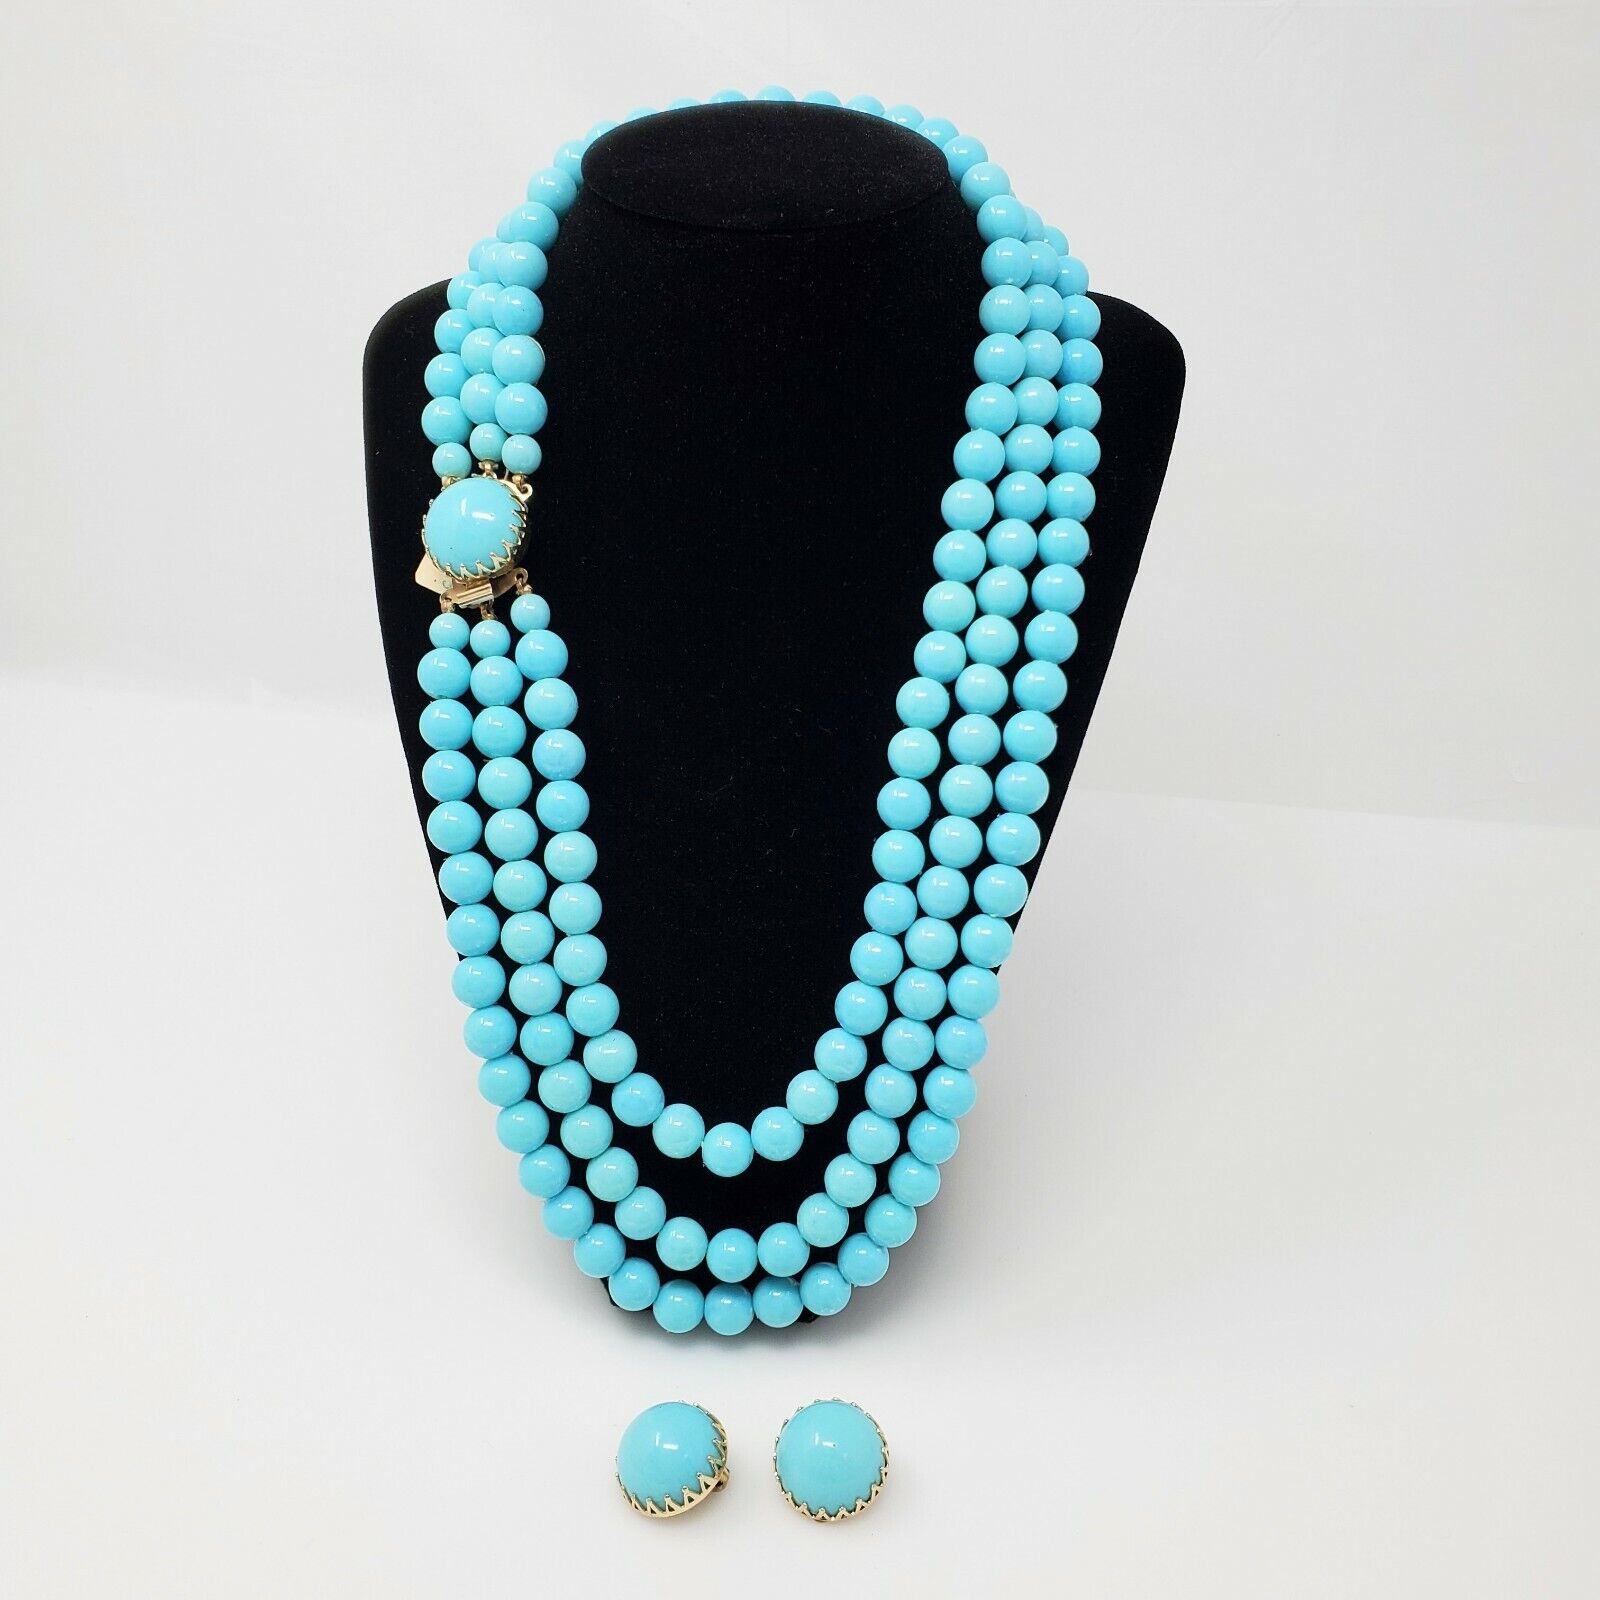 NOS Mid-Century Modern Super sale Tiffany Blue Beads & 3 Necklace Max 48% OFF Strand Ea